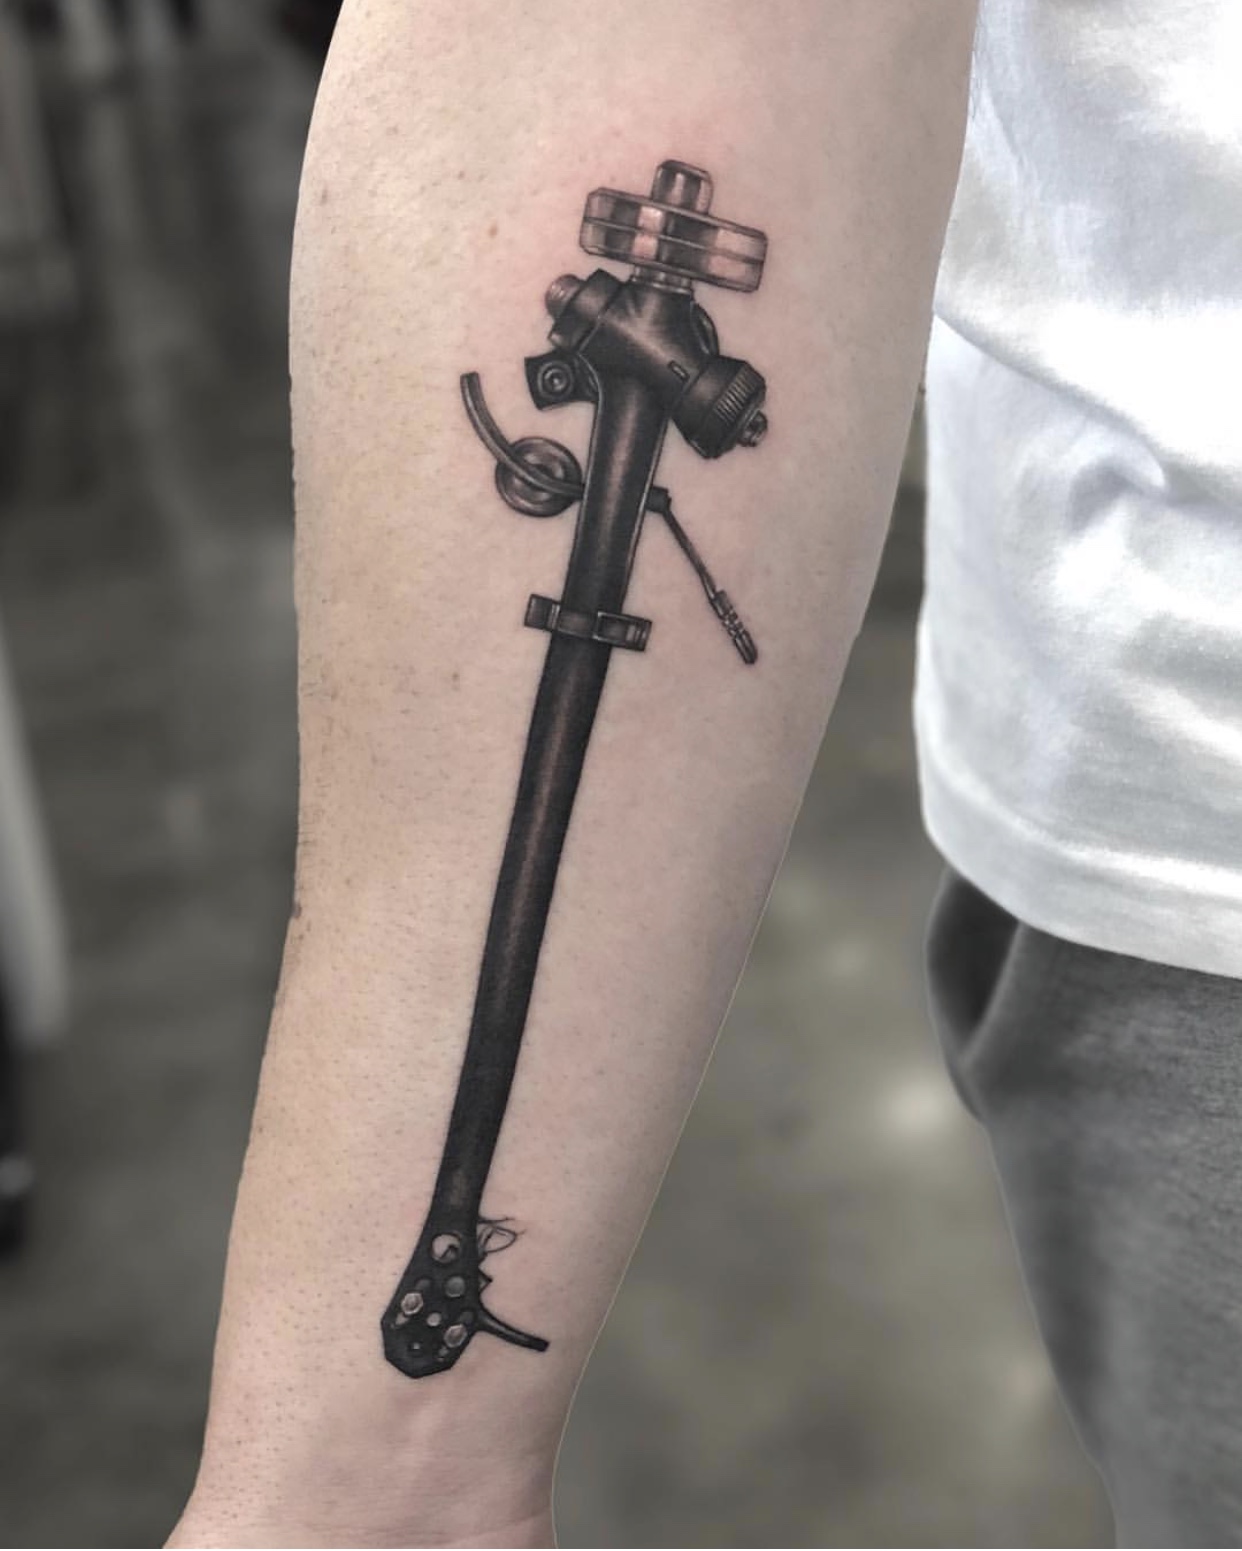 Got the great fairy sword tattoo traditional style finished on my arm today  : r/Zeldatattoos